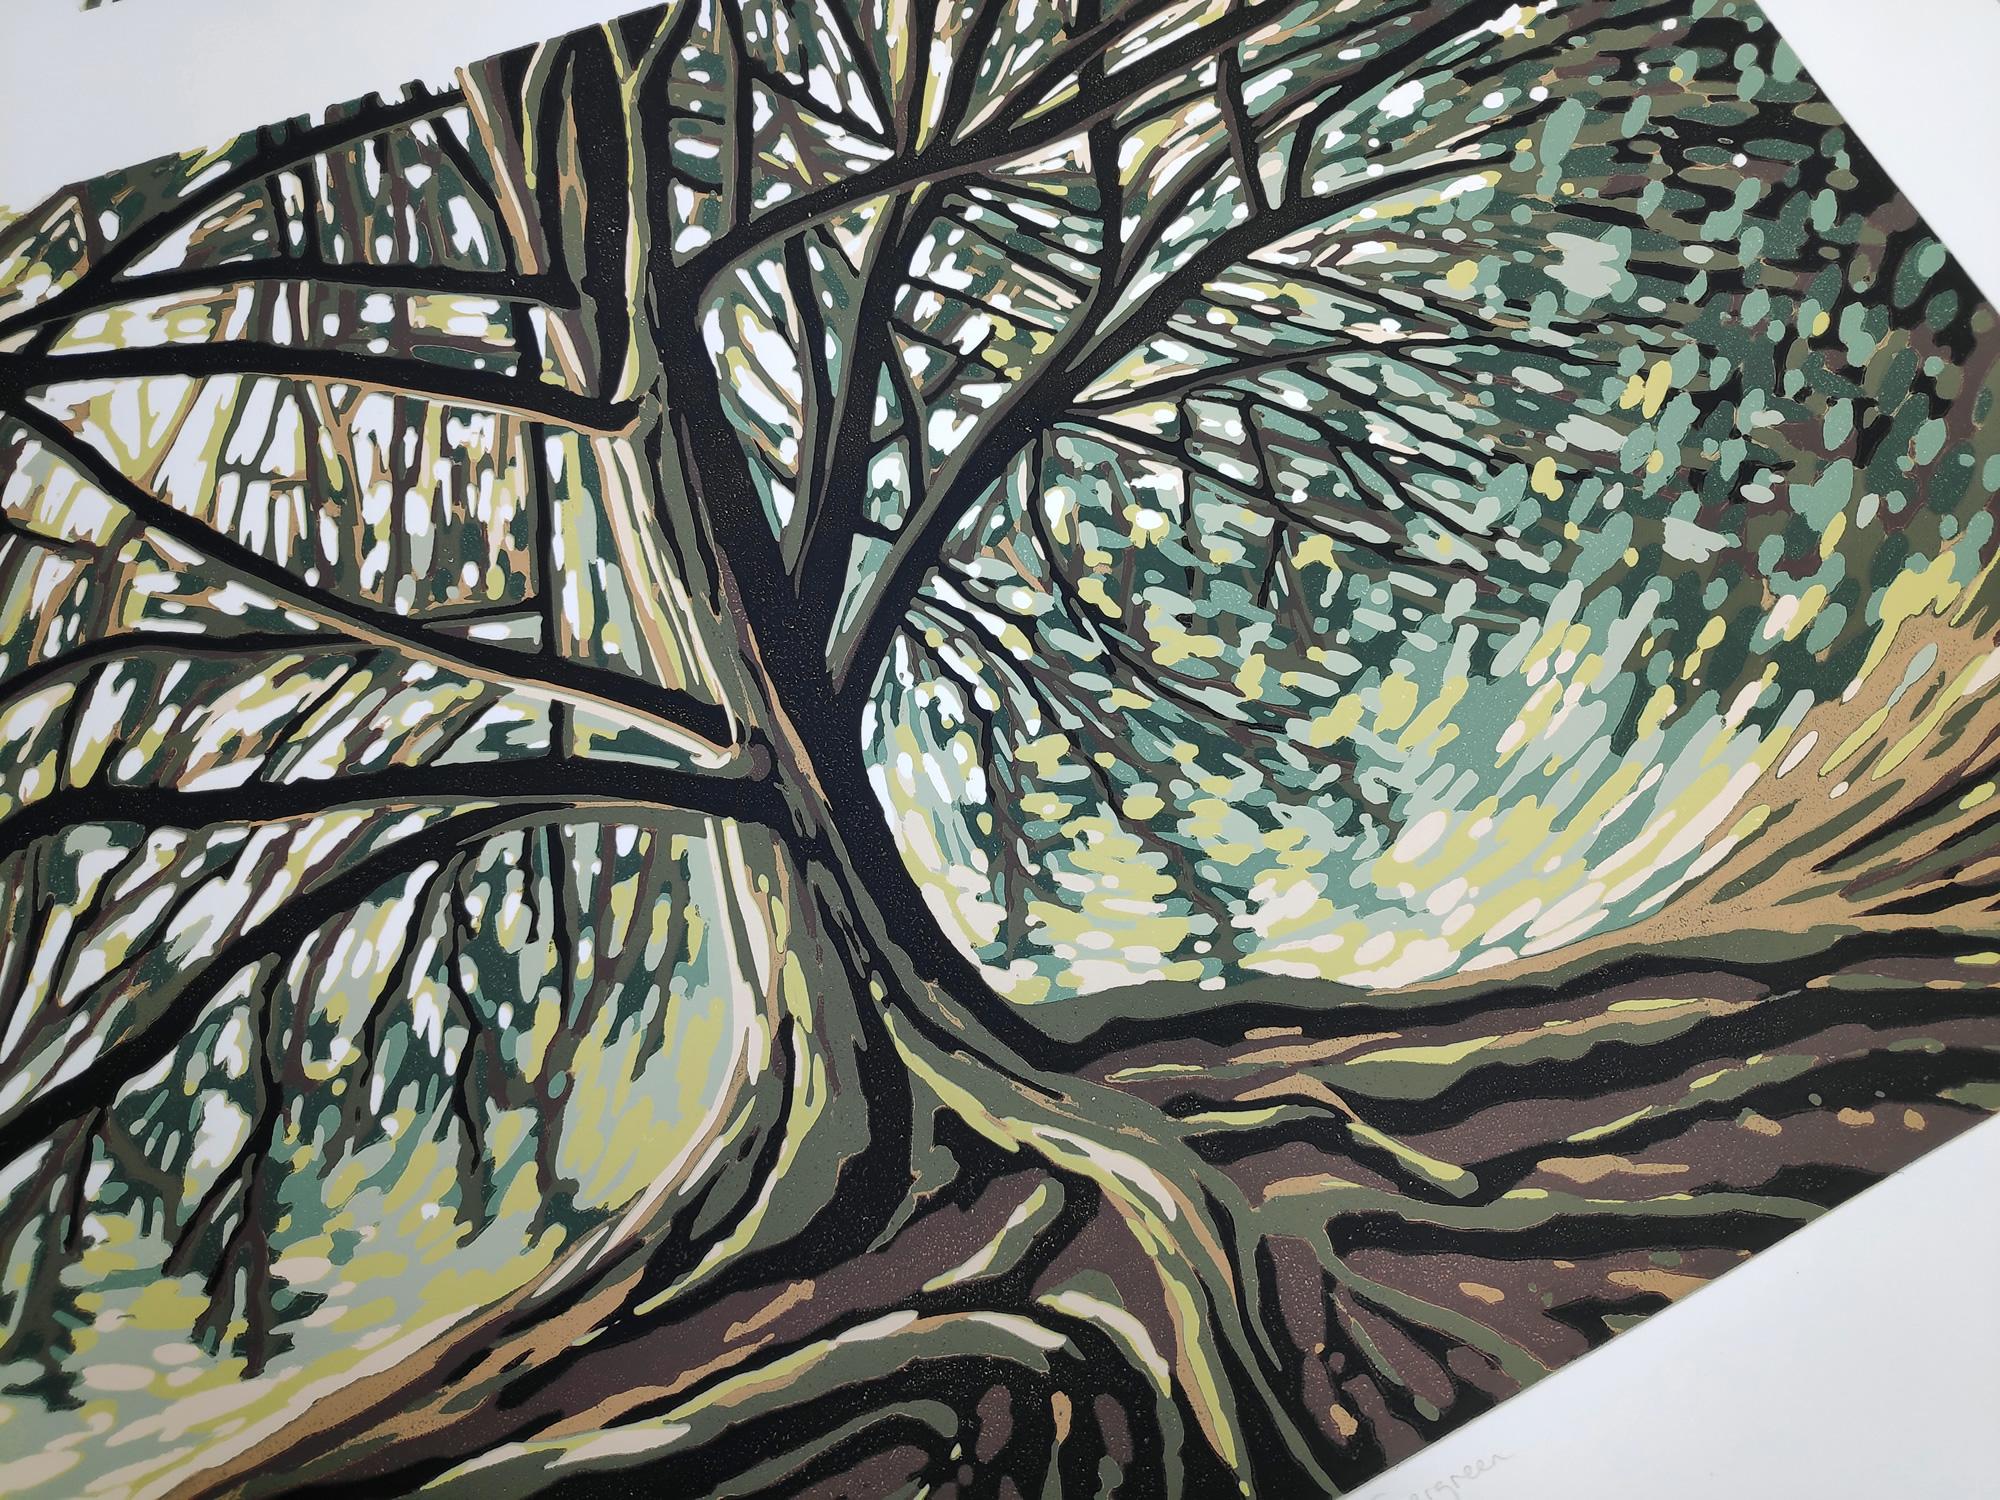 Evergreen, Alexandra Buckle, Limited edition print, Landscape art for sale - Contemporary Print by Alexandra Buckle 